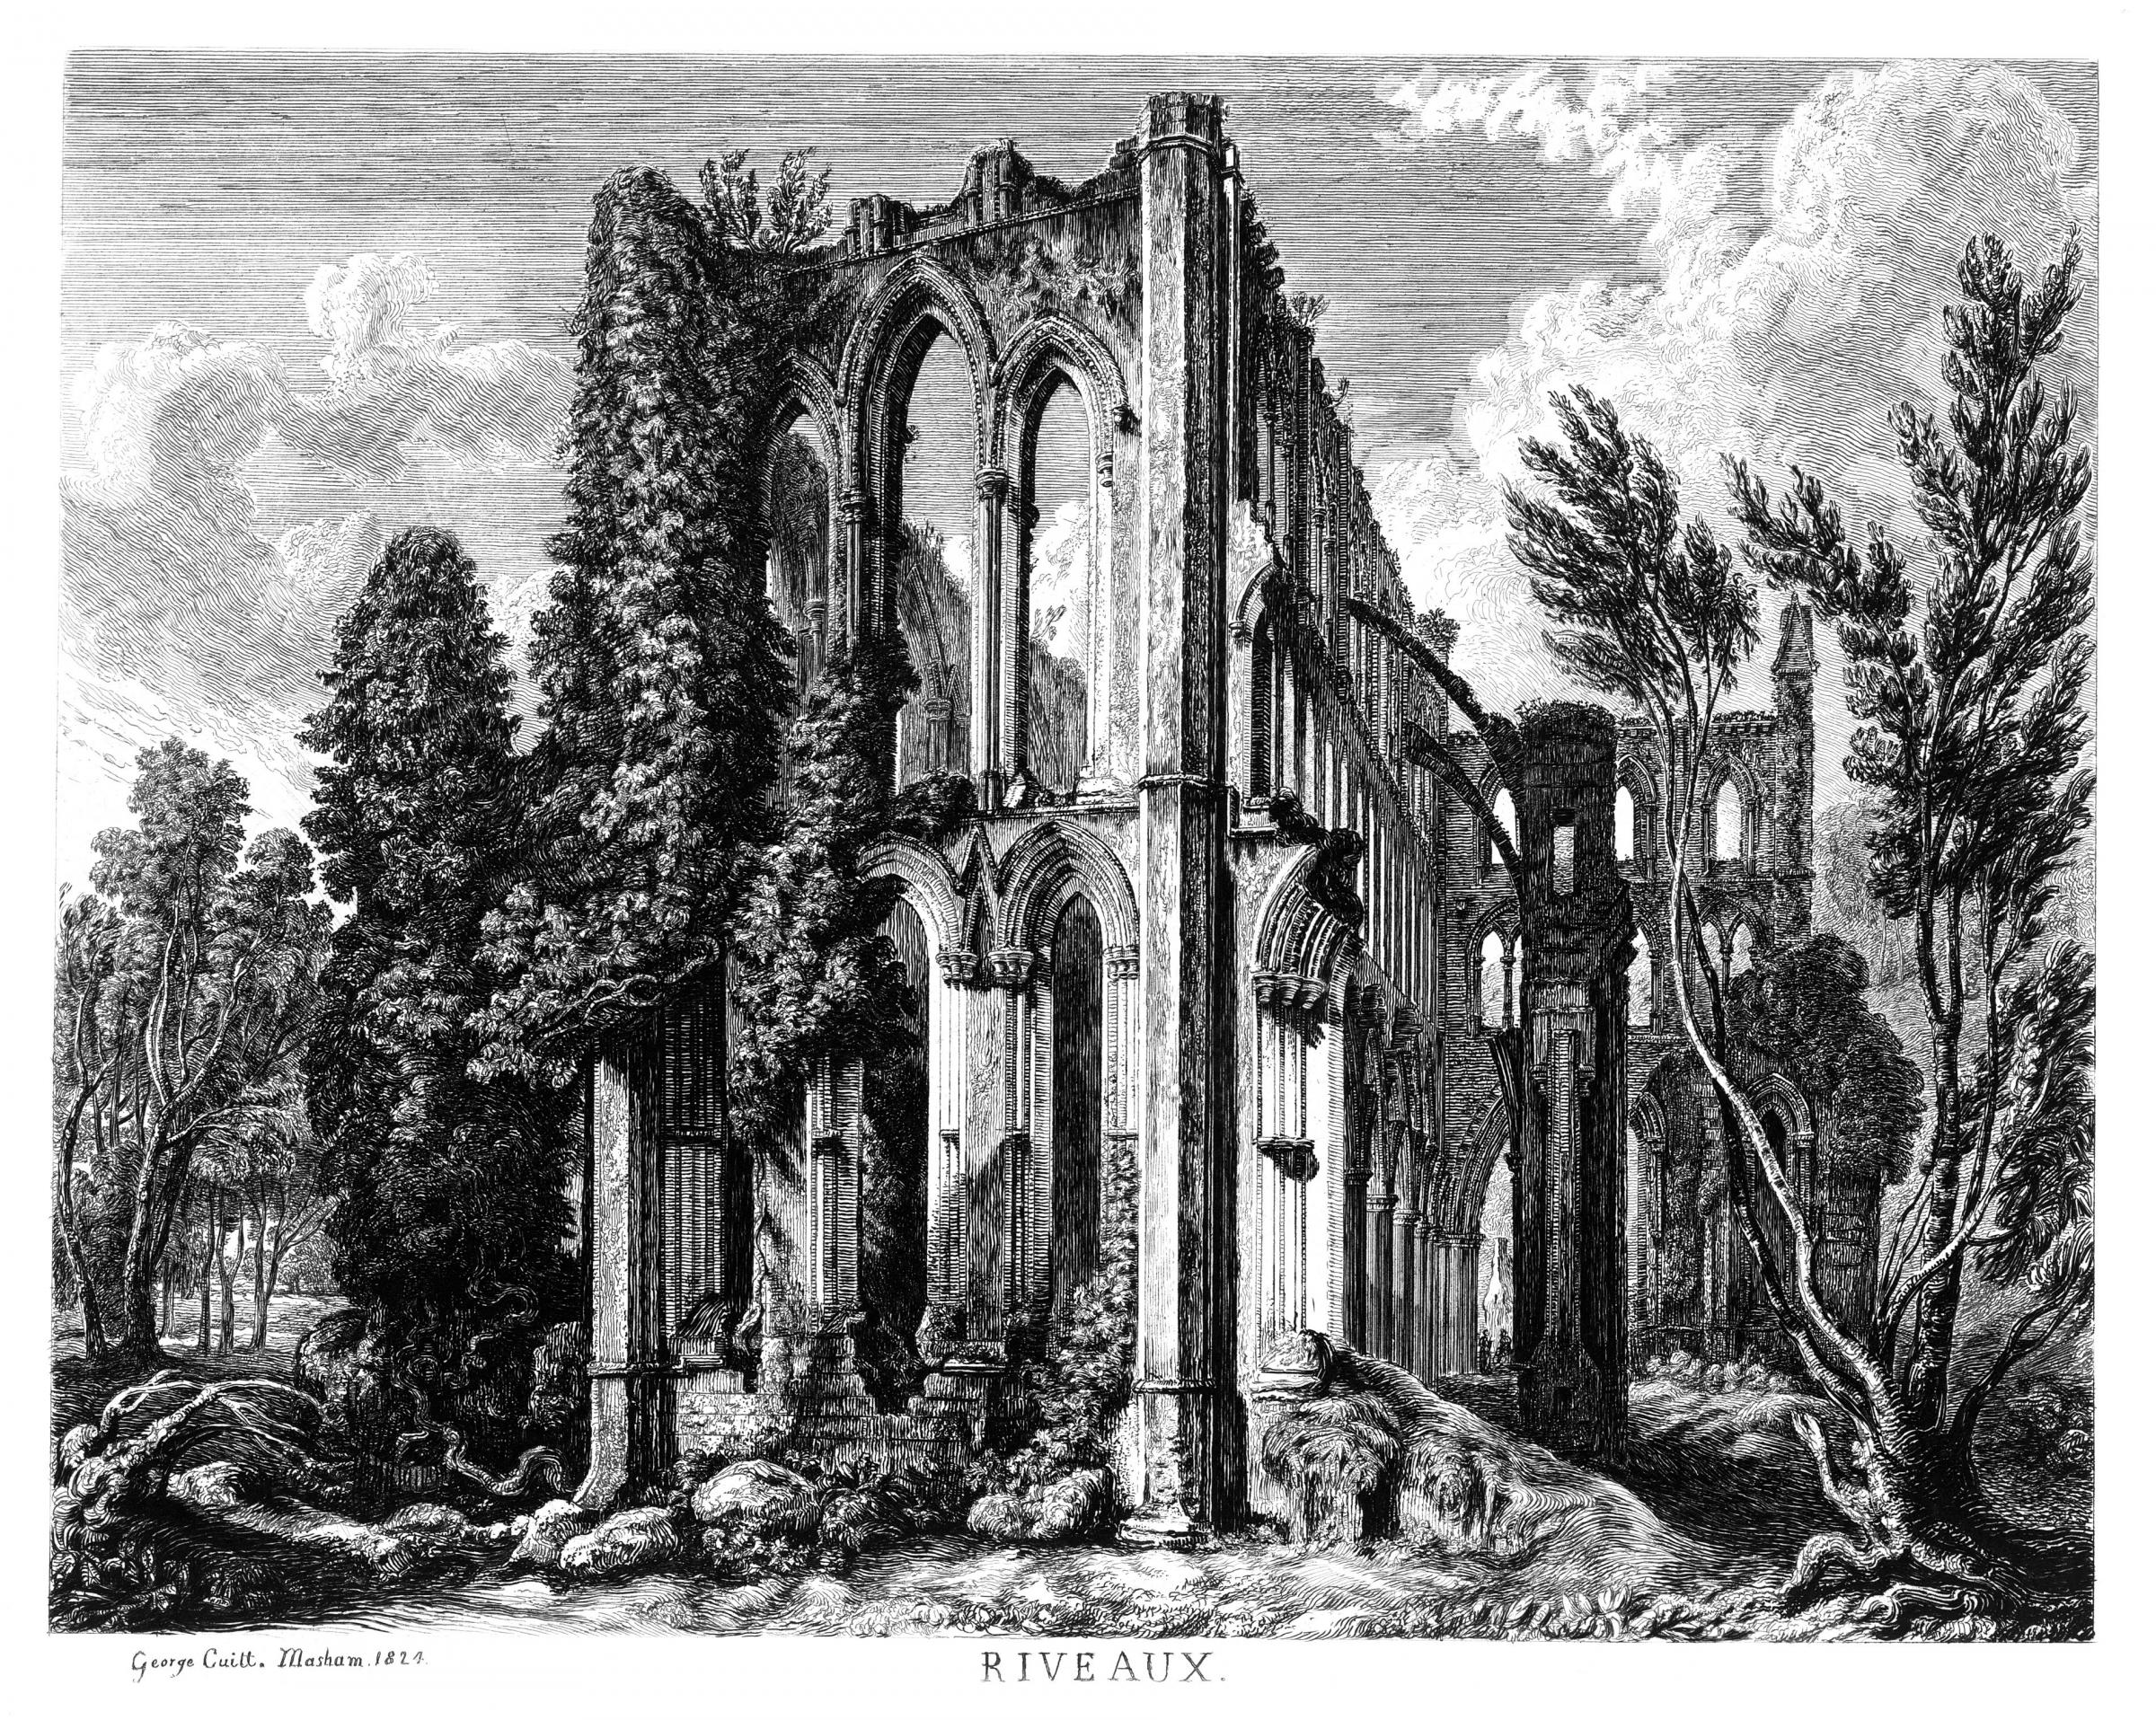 Rievaulx Abbey, Yorkshire, 1824. Cuitt is renowned for his wonderful ivy and trees, as this etching shows. The tree on the right also conveniently parted for him to reveal one of the abbeys pinnacles (Bree 2.58, Cheshire Archives and Local Studies)